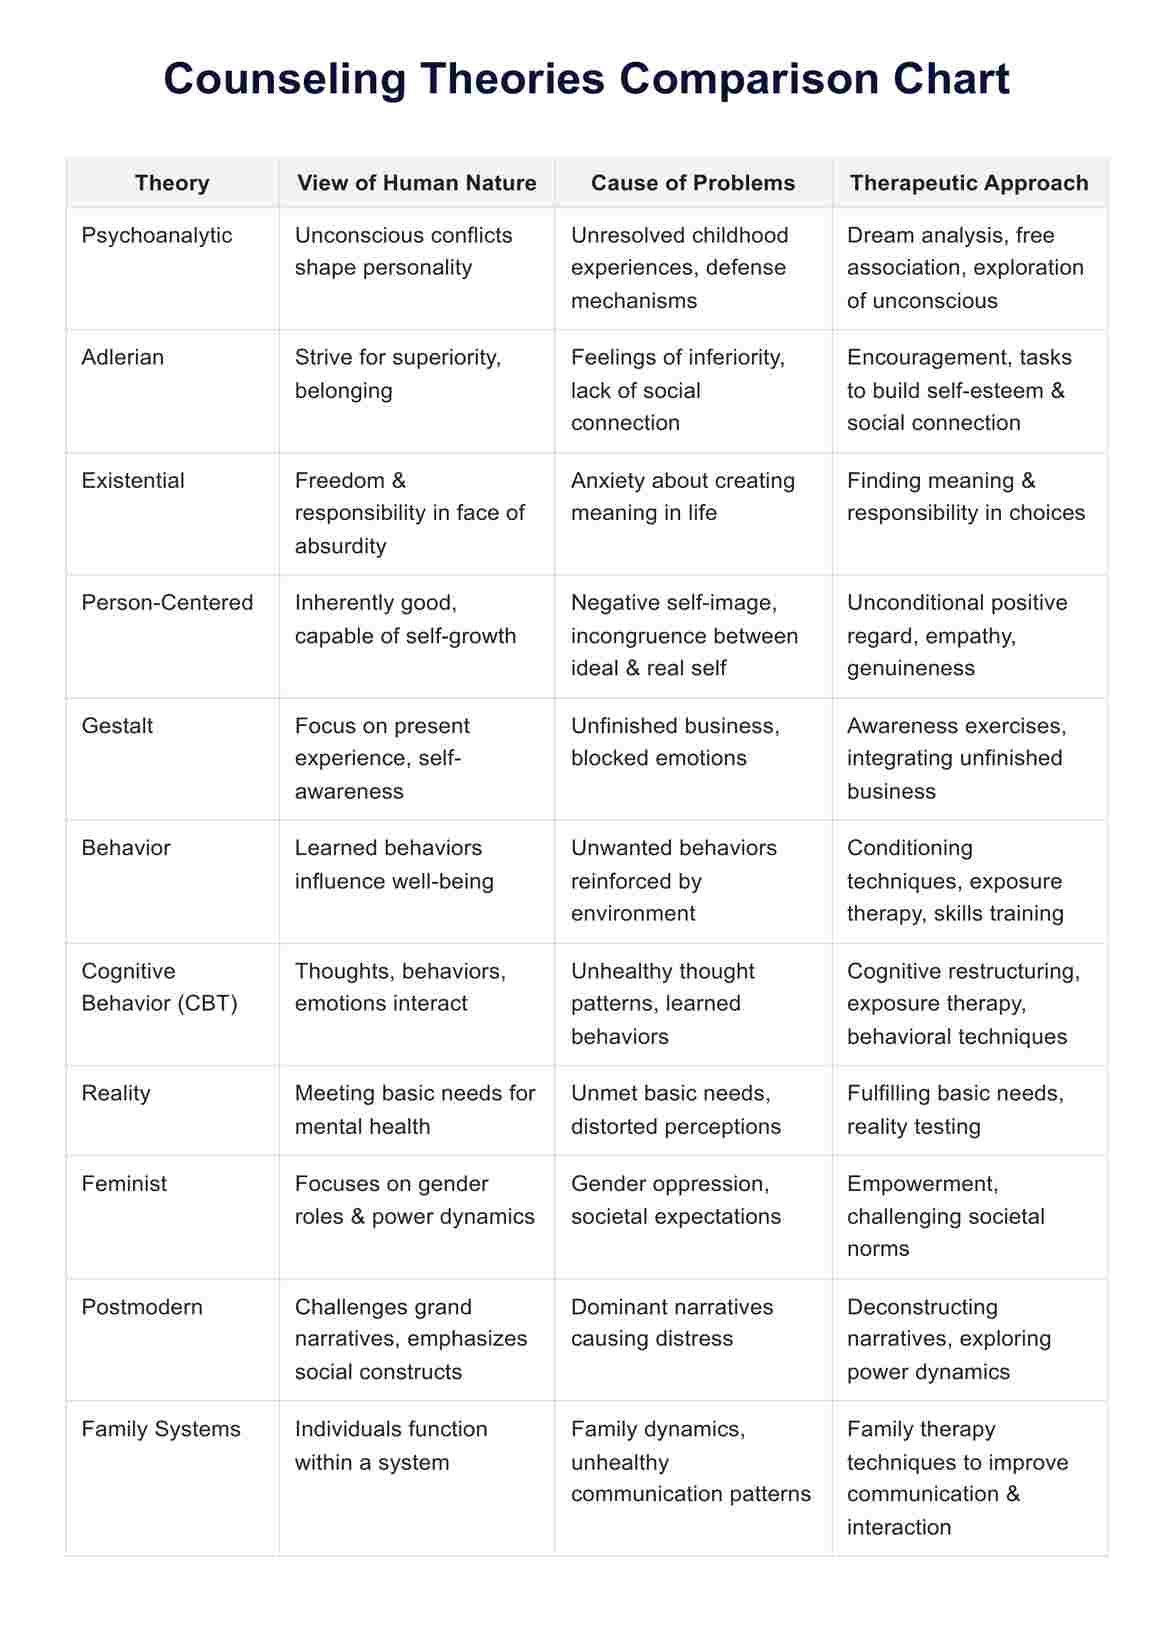 Counseling Theories Comparison Chart PDF Example